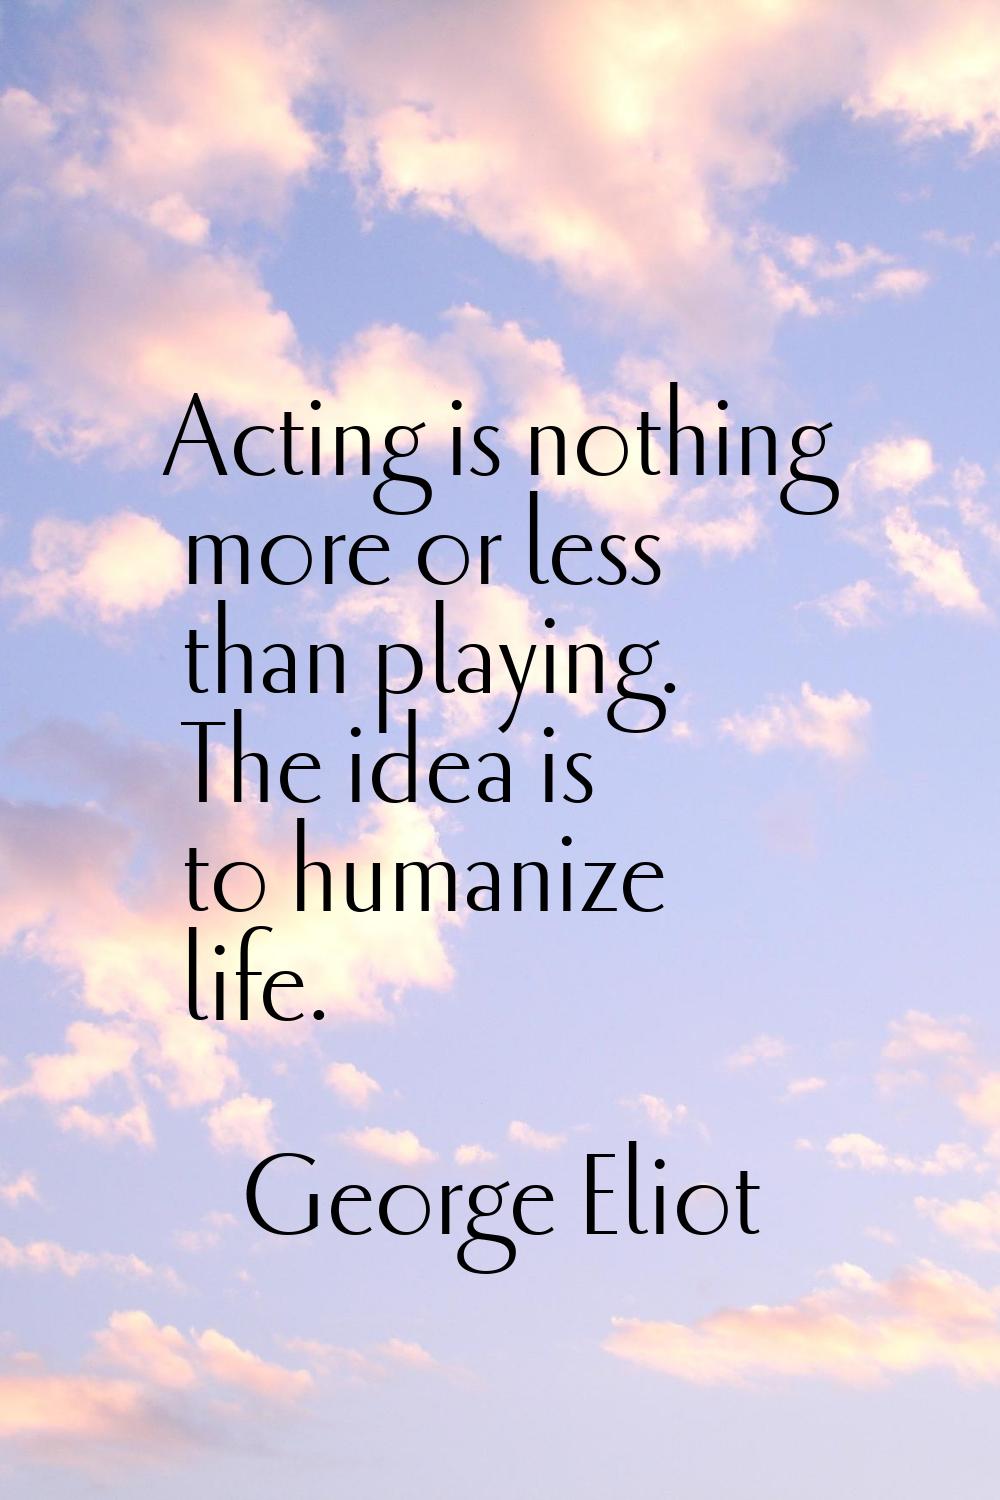 Acting is nothing more or less than playing. The idea is to humanize life.